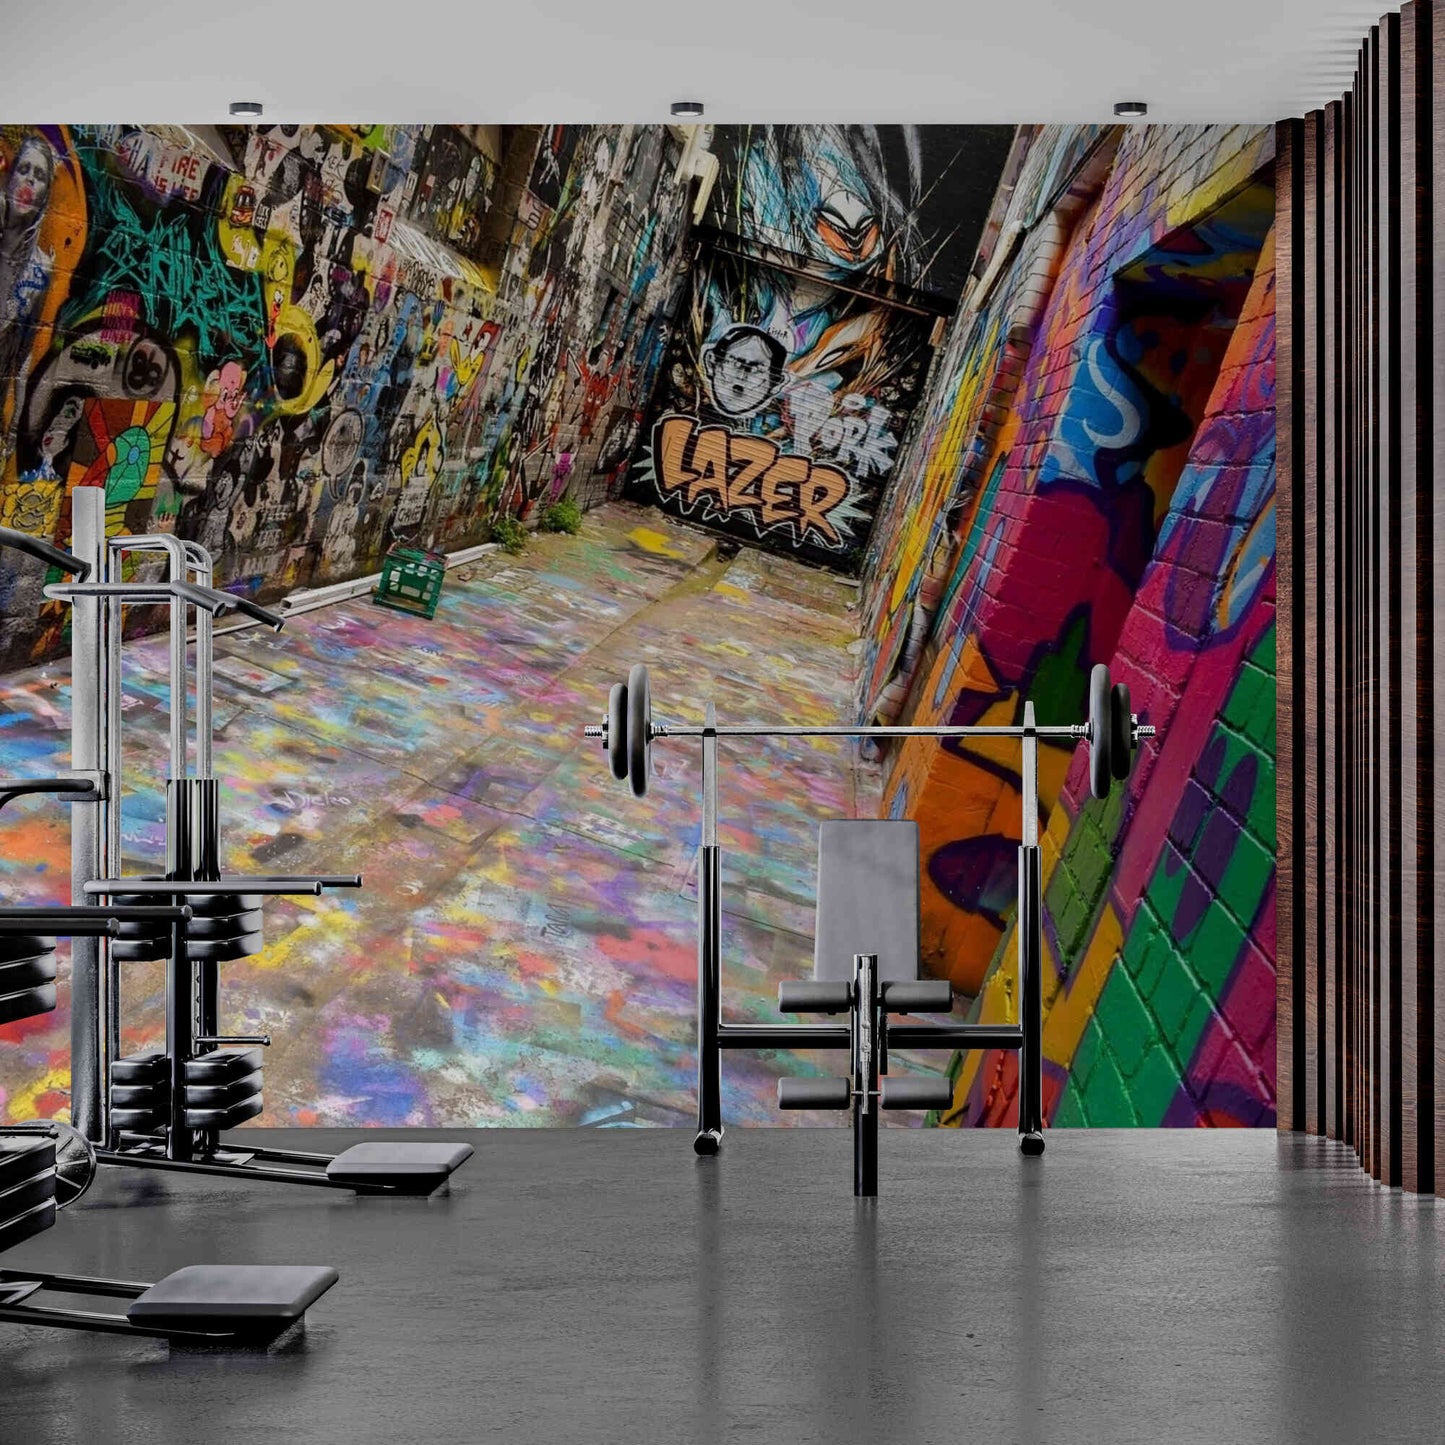 Vivid abstract graffiti art in a photo wallpaper mural, showcasing the colorful chaos of street expression.